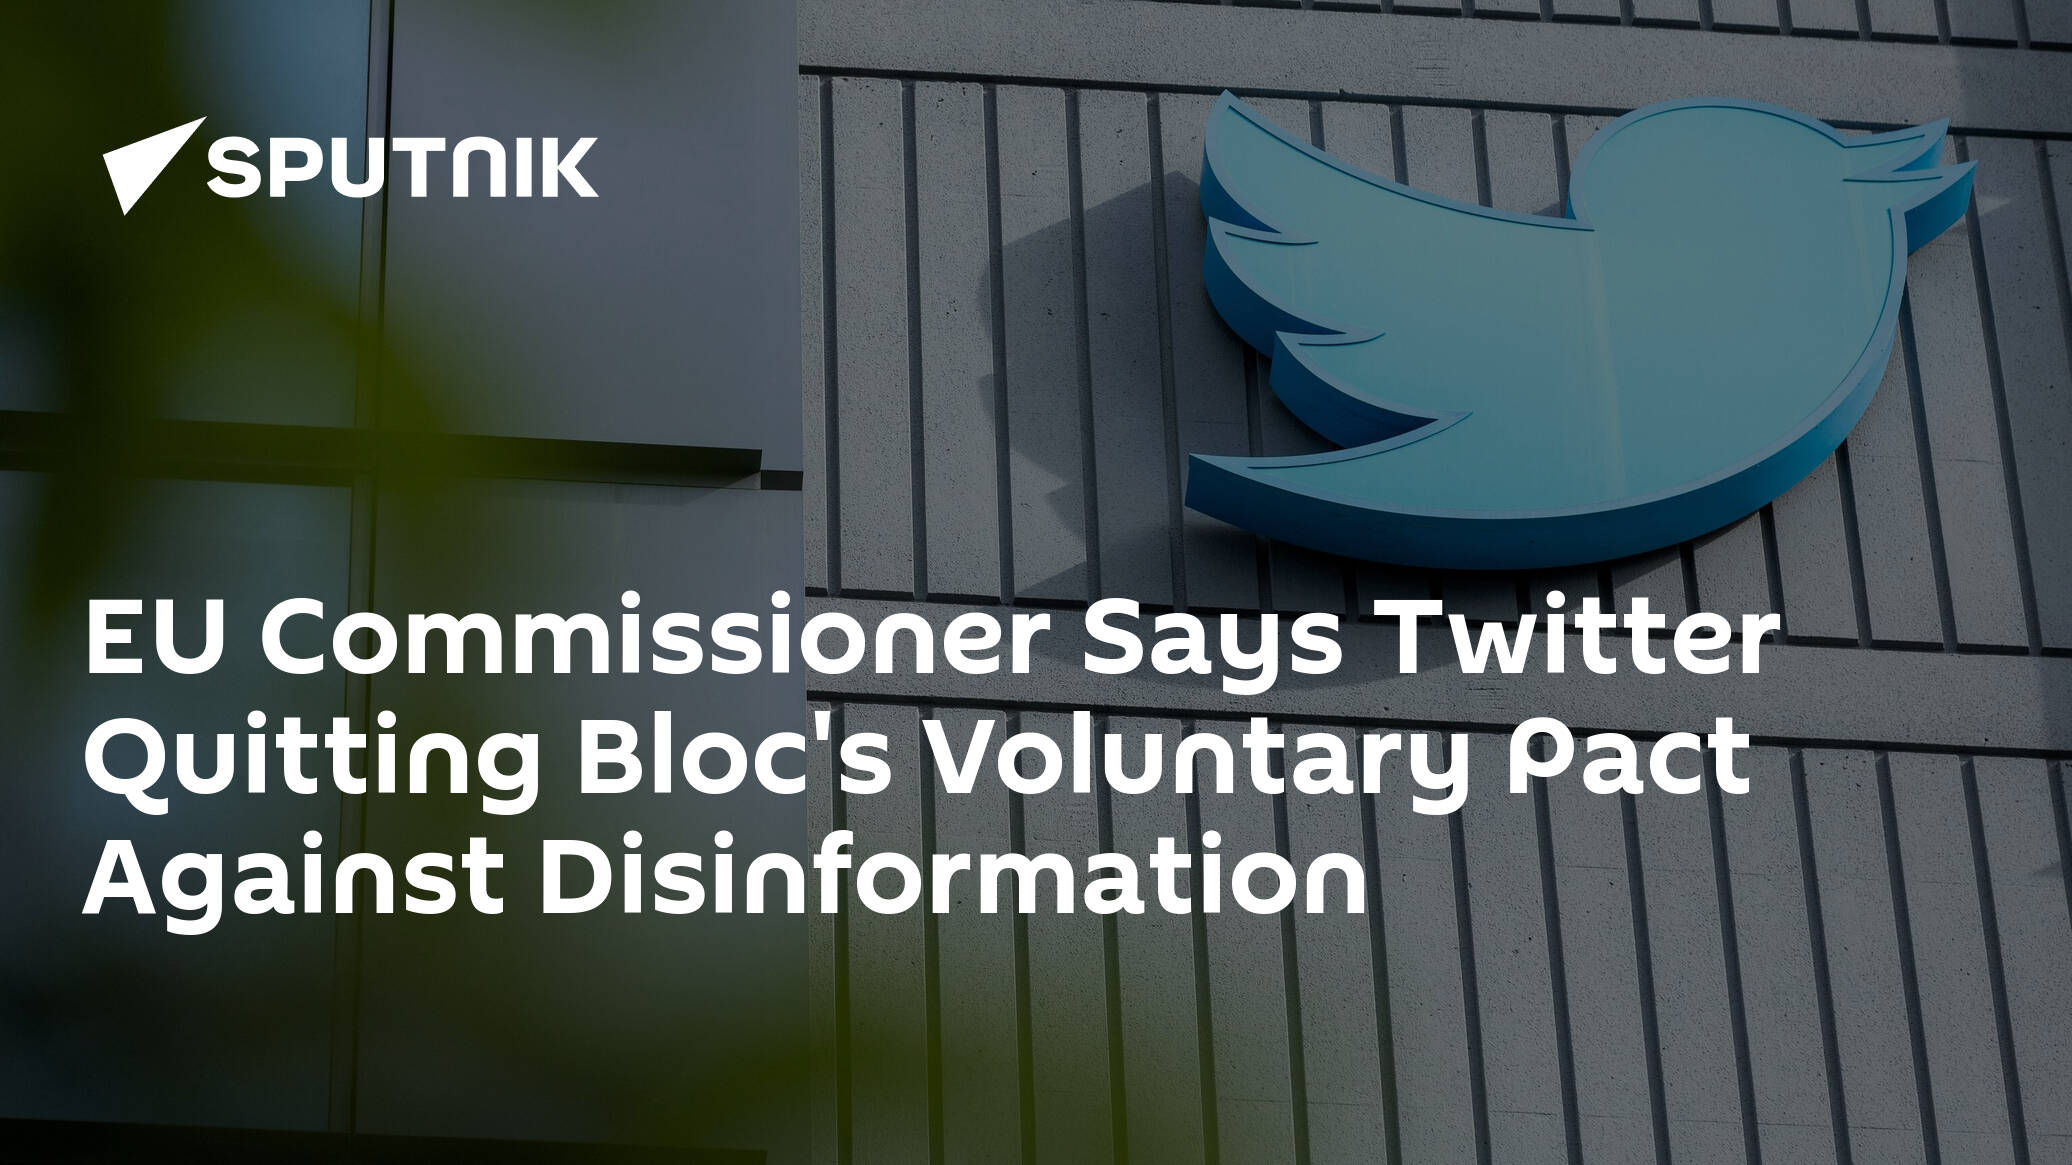 EU Commissioner Says Twitter Quitting Bloc's Voluntary Pact Against Disinformation